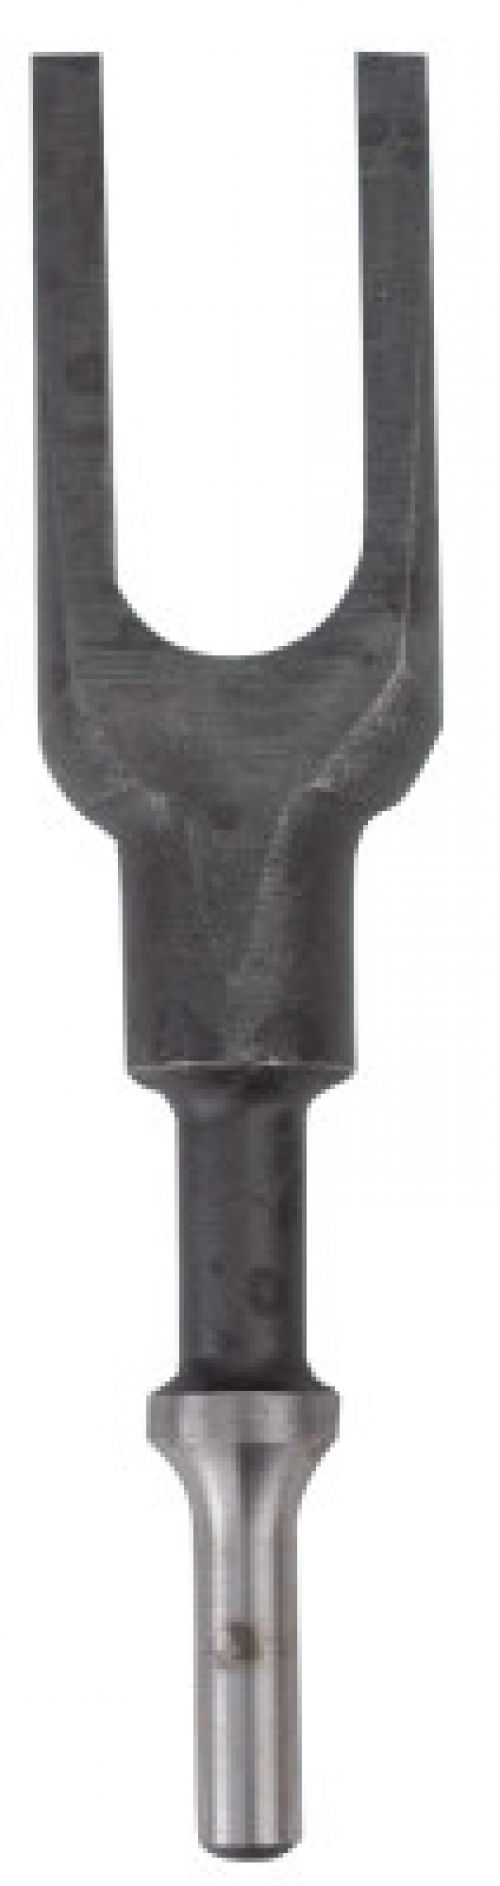 SIOUX FORCE TOOLS Hammer Accessories, 6 7/8 in Fork Chisel Bit